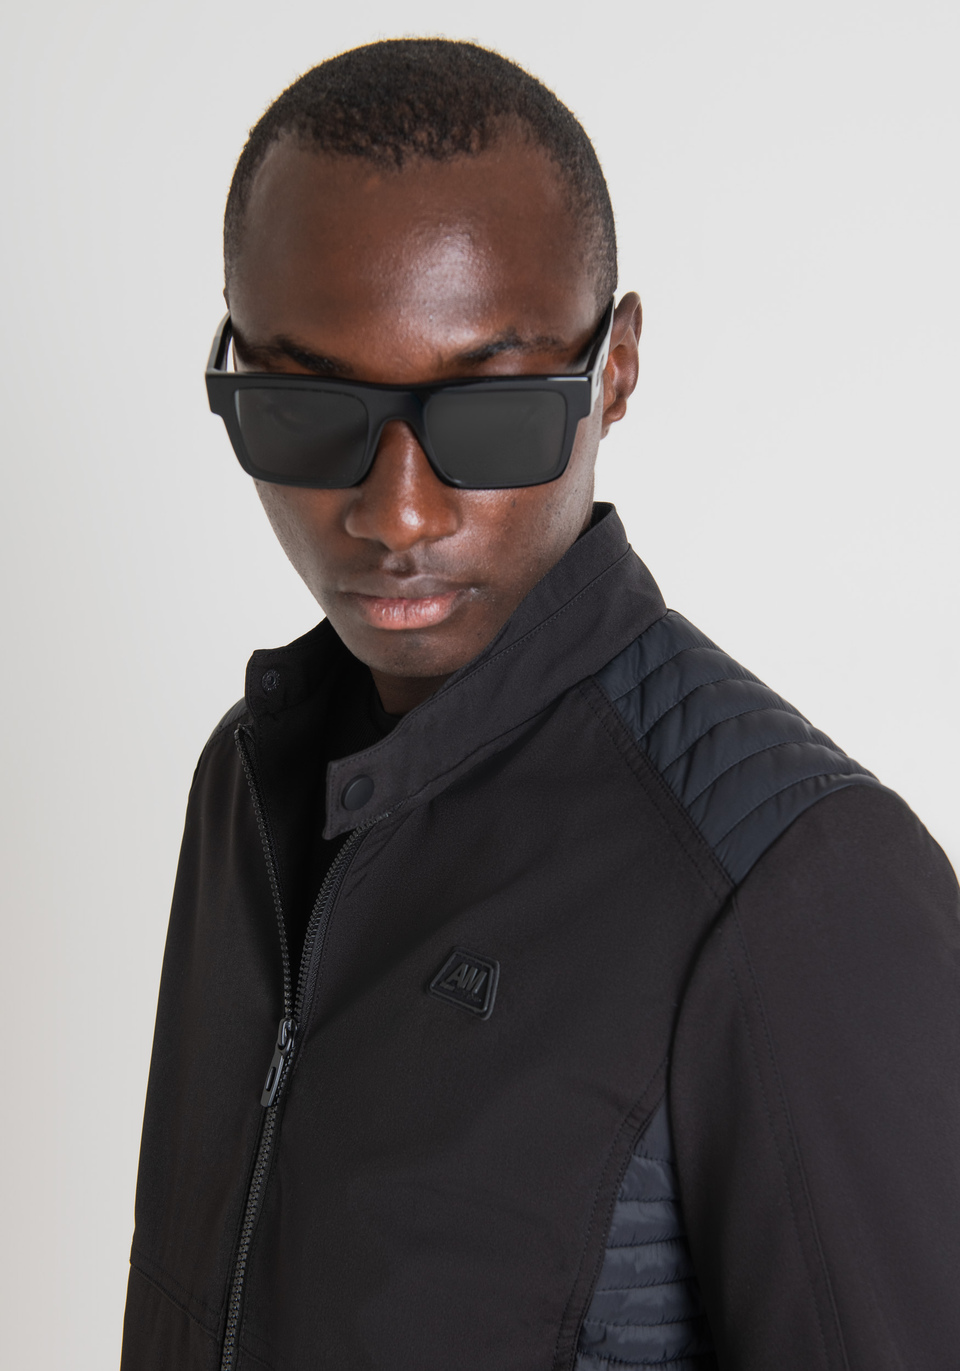 SLIM-FIT JACKET IN TECHNICAL FABRIC WITH CONTRASTING DETAILS - Antony Morato Online Shop